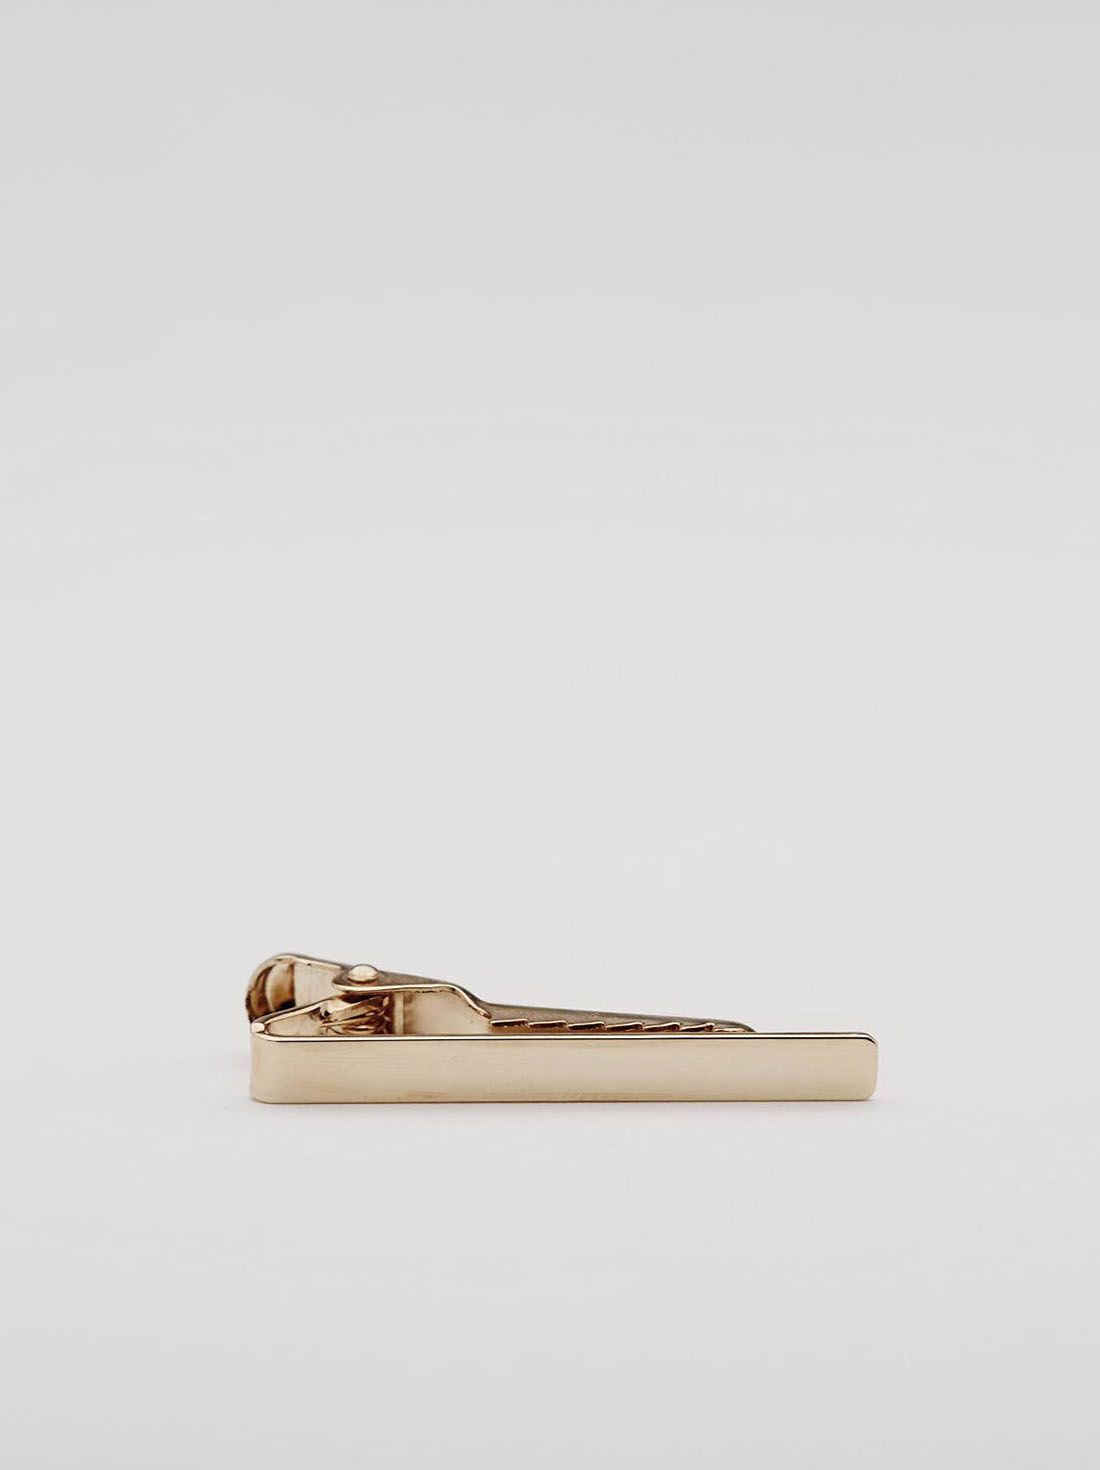 Gold Tie Clip Isaac